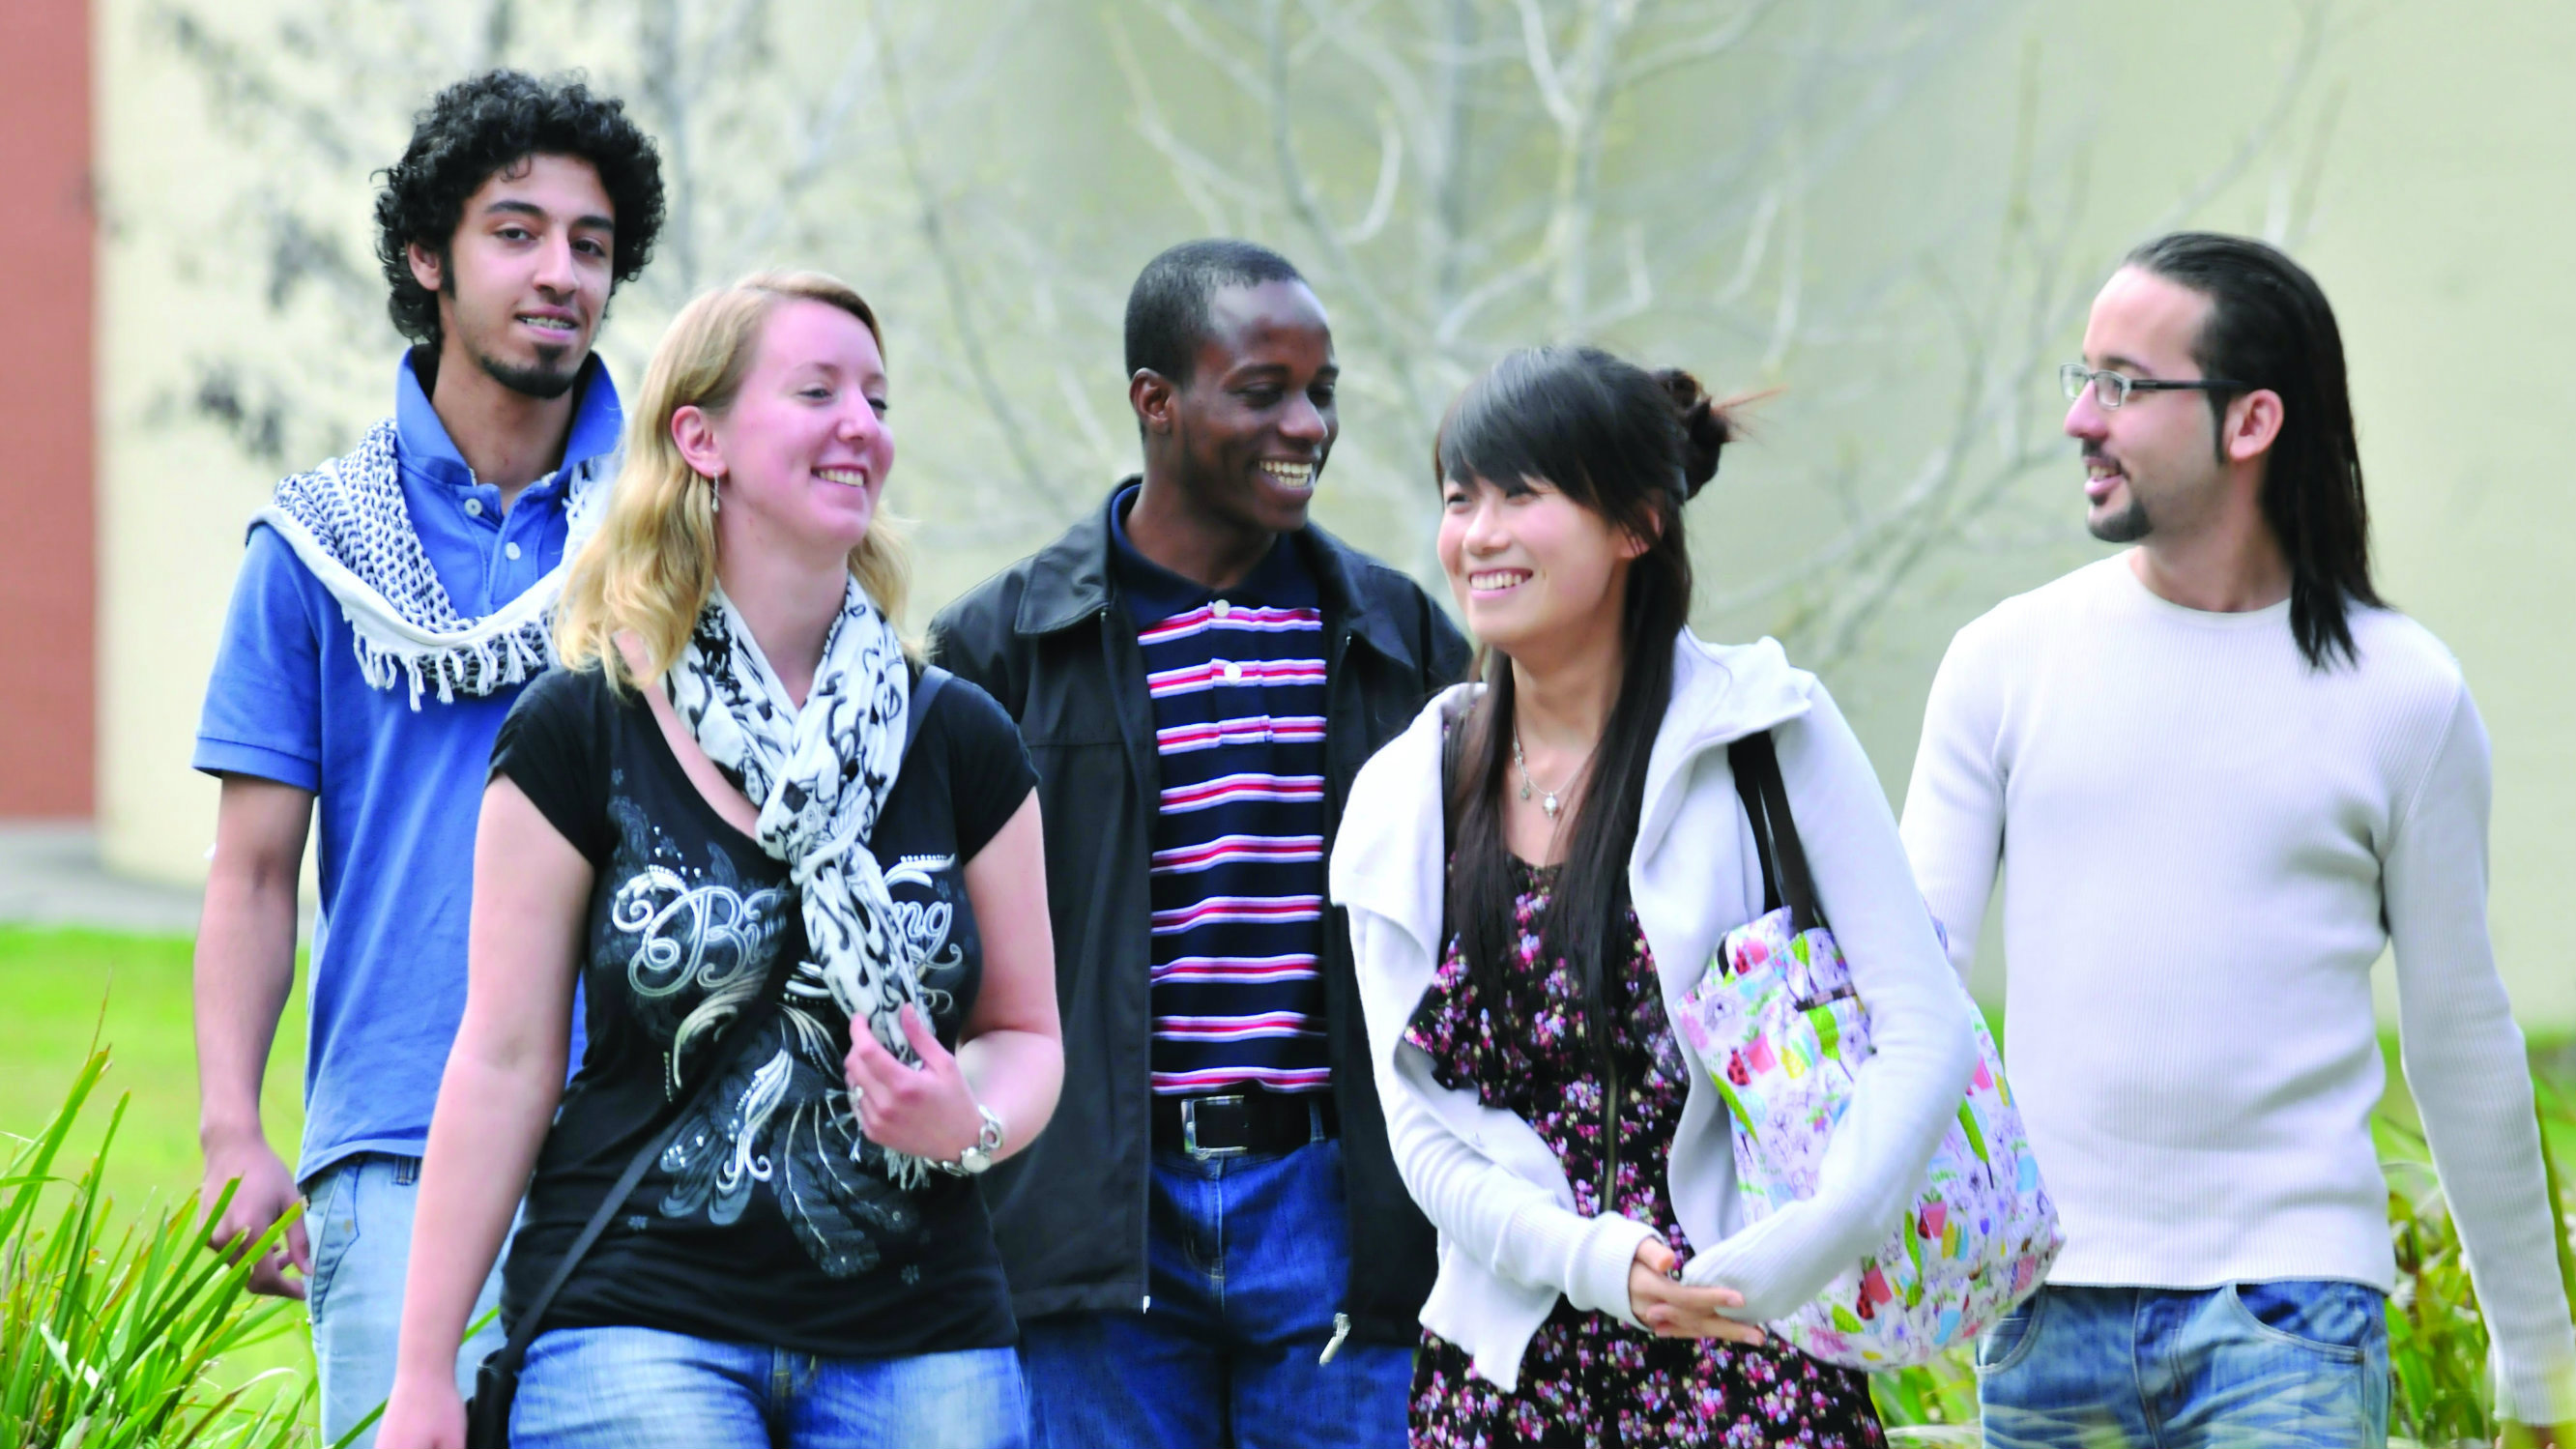 Are You a Commencing On Campus International Student at UNE This Trimester? Your Orientation Program Begins Tomorrow!